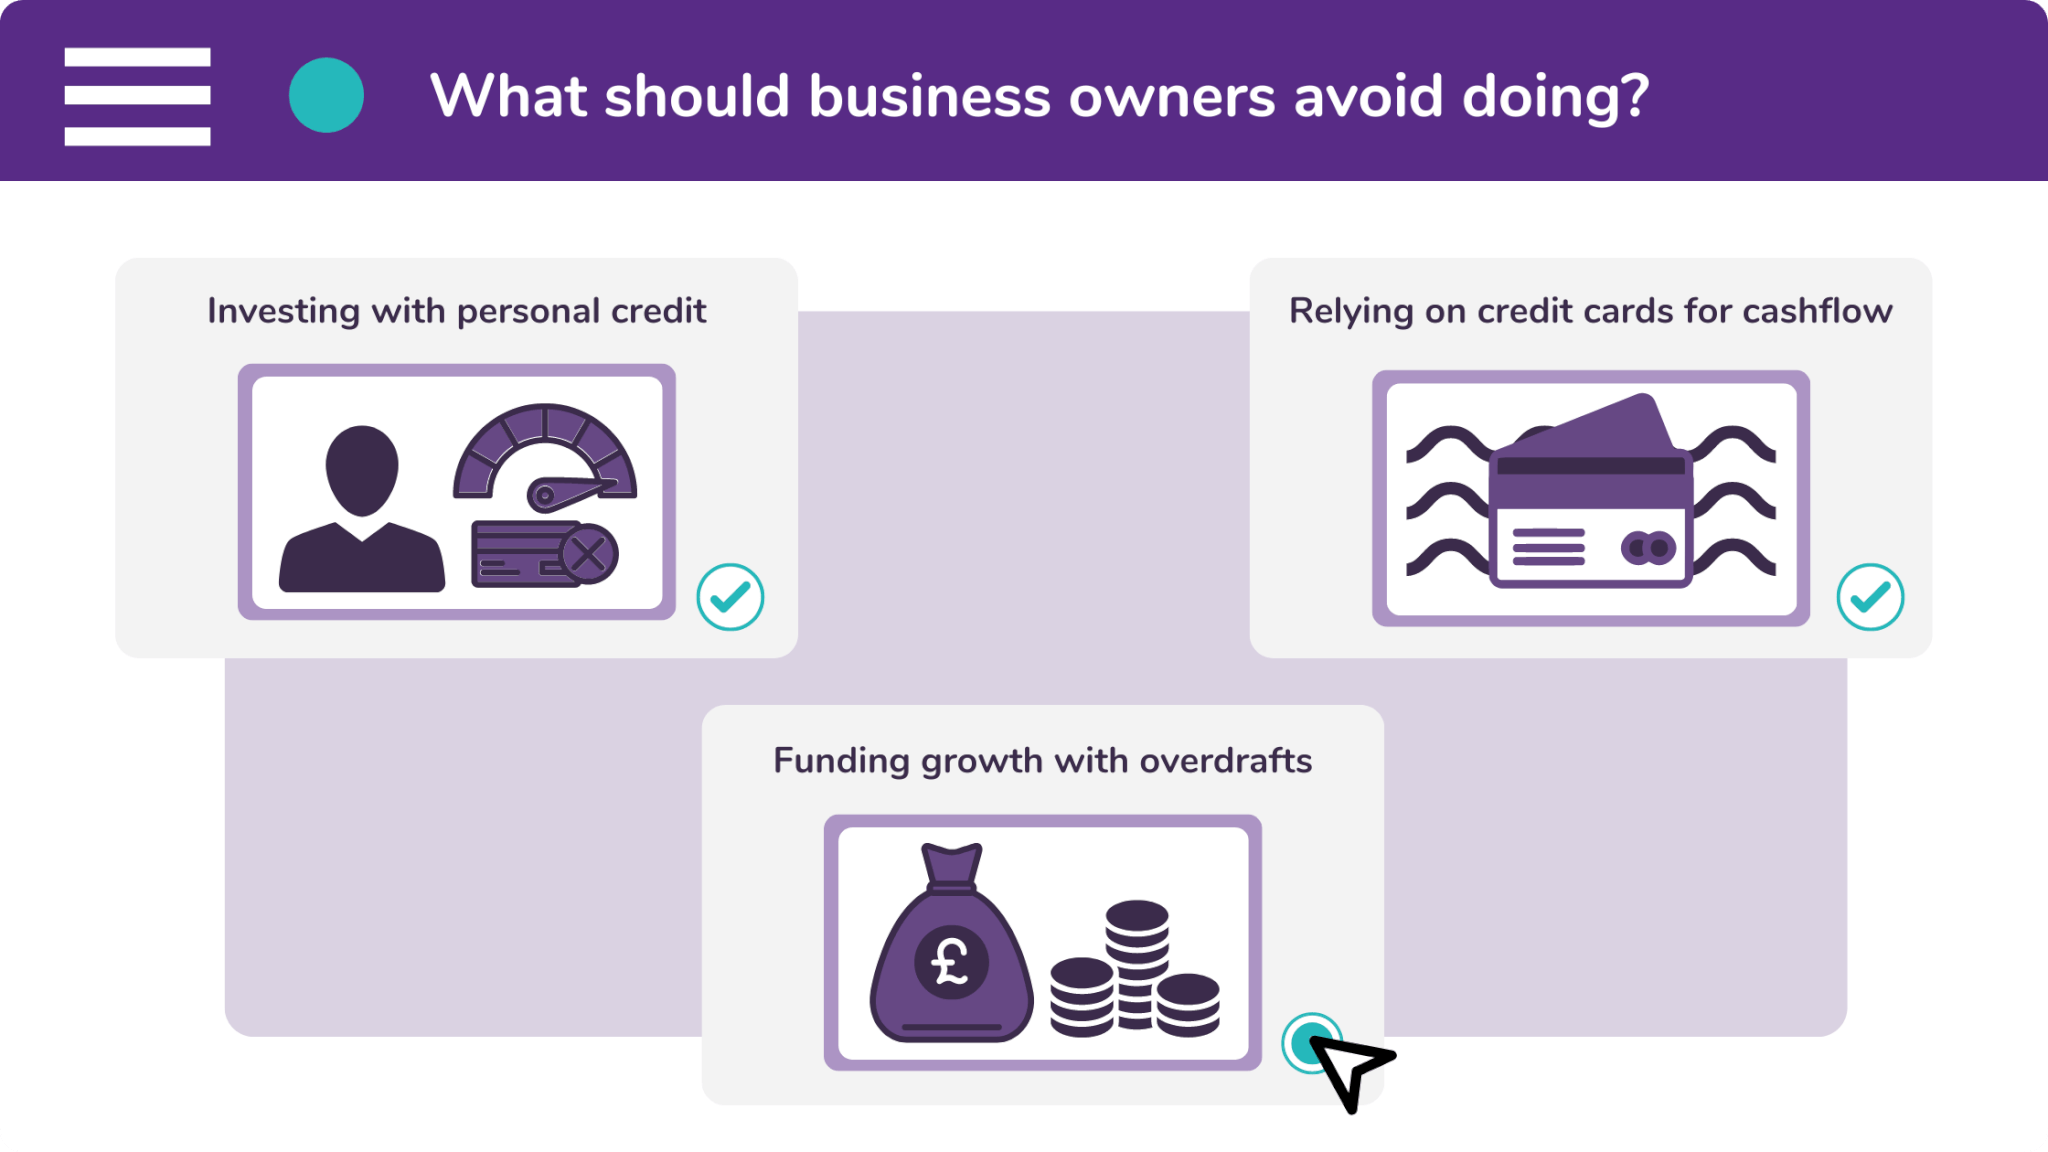 Business owners should avoid using three things to fund commercial growth: personal credit, credit cards, and overdrafts.